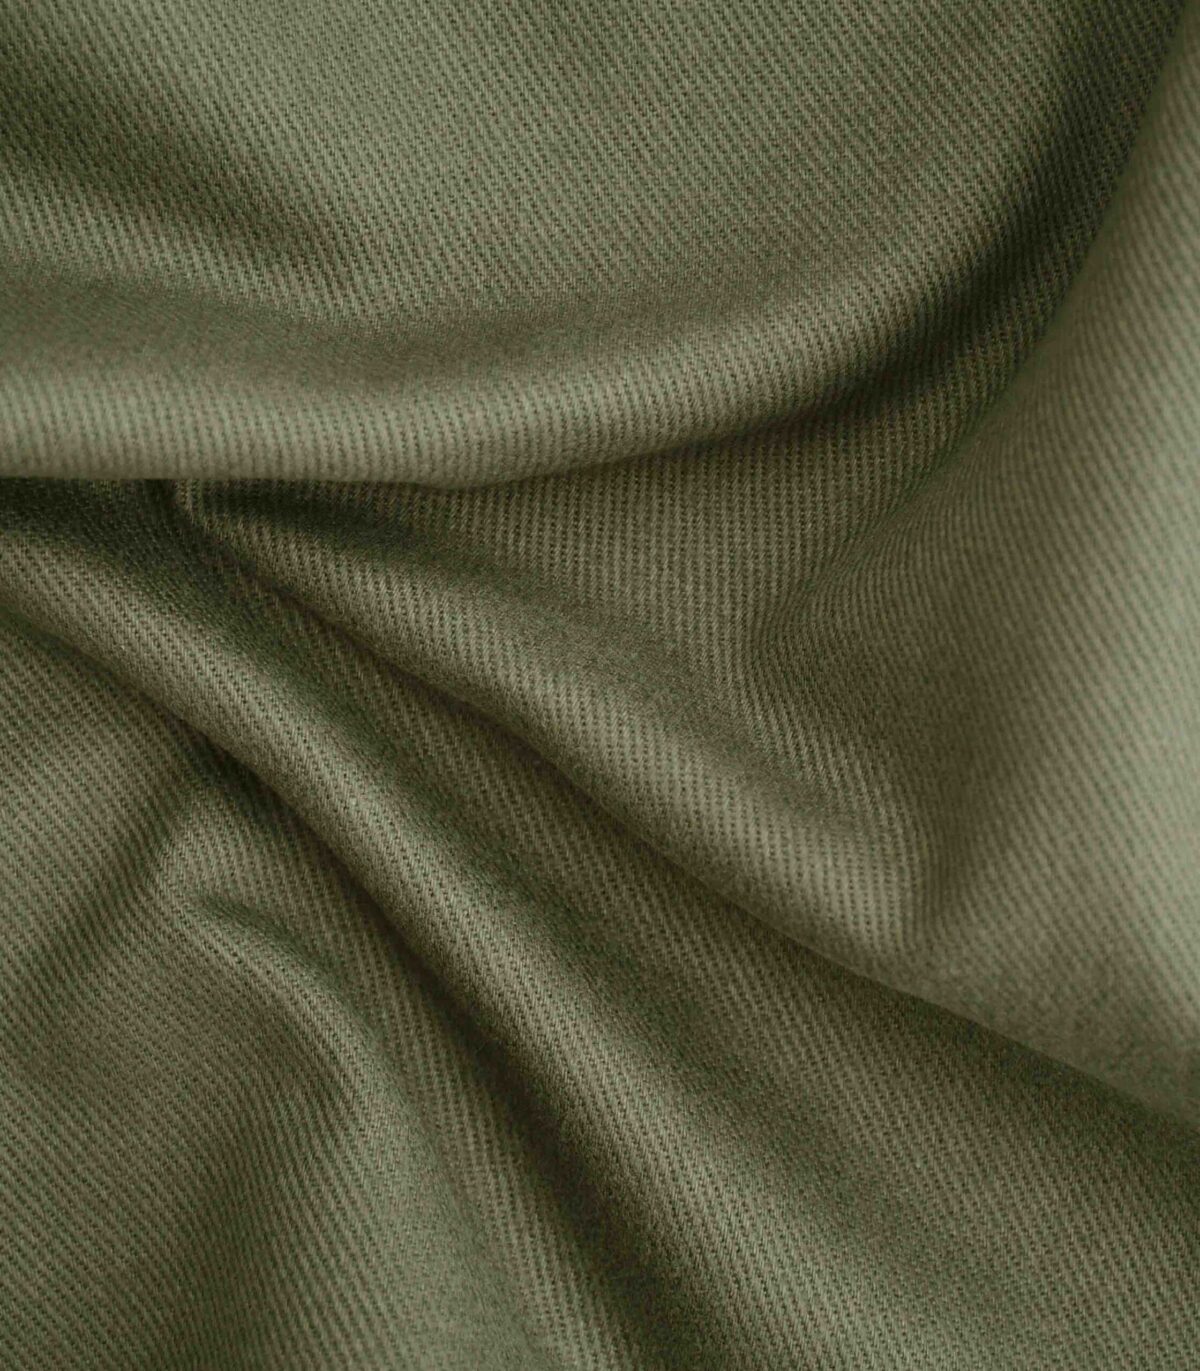 Green Dyed Twill Lyocell Fabric